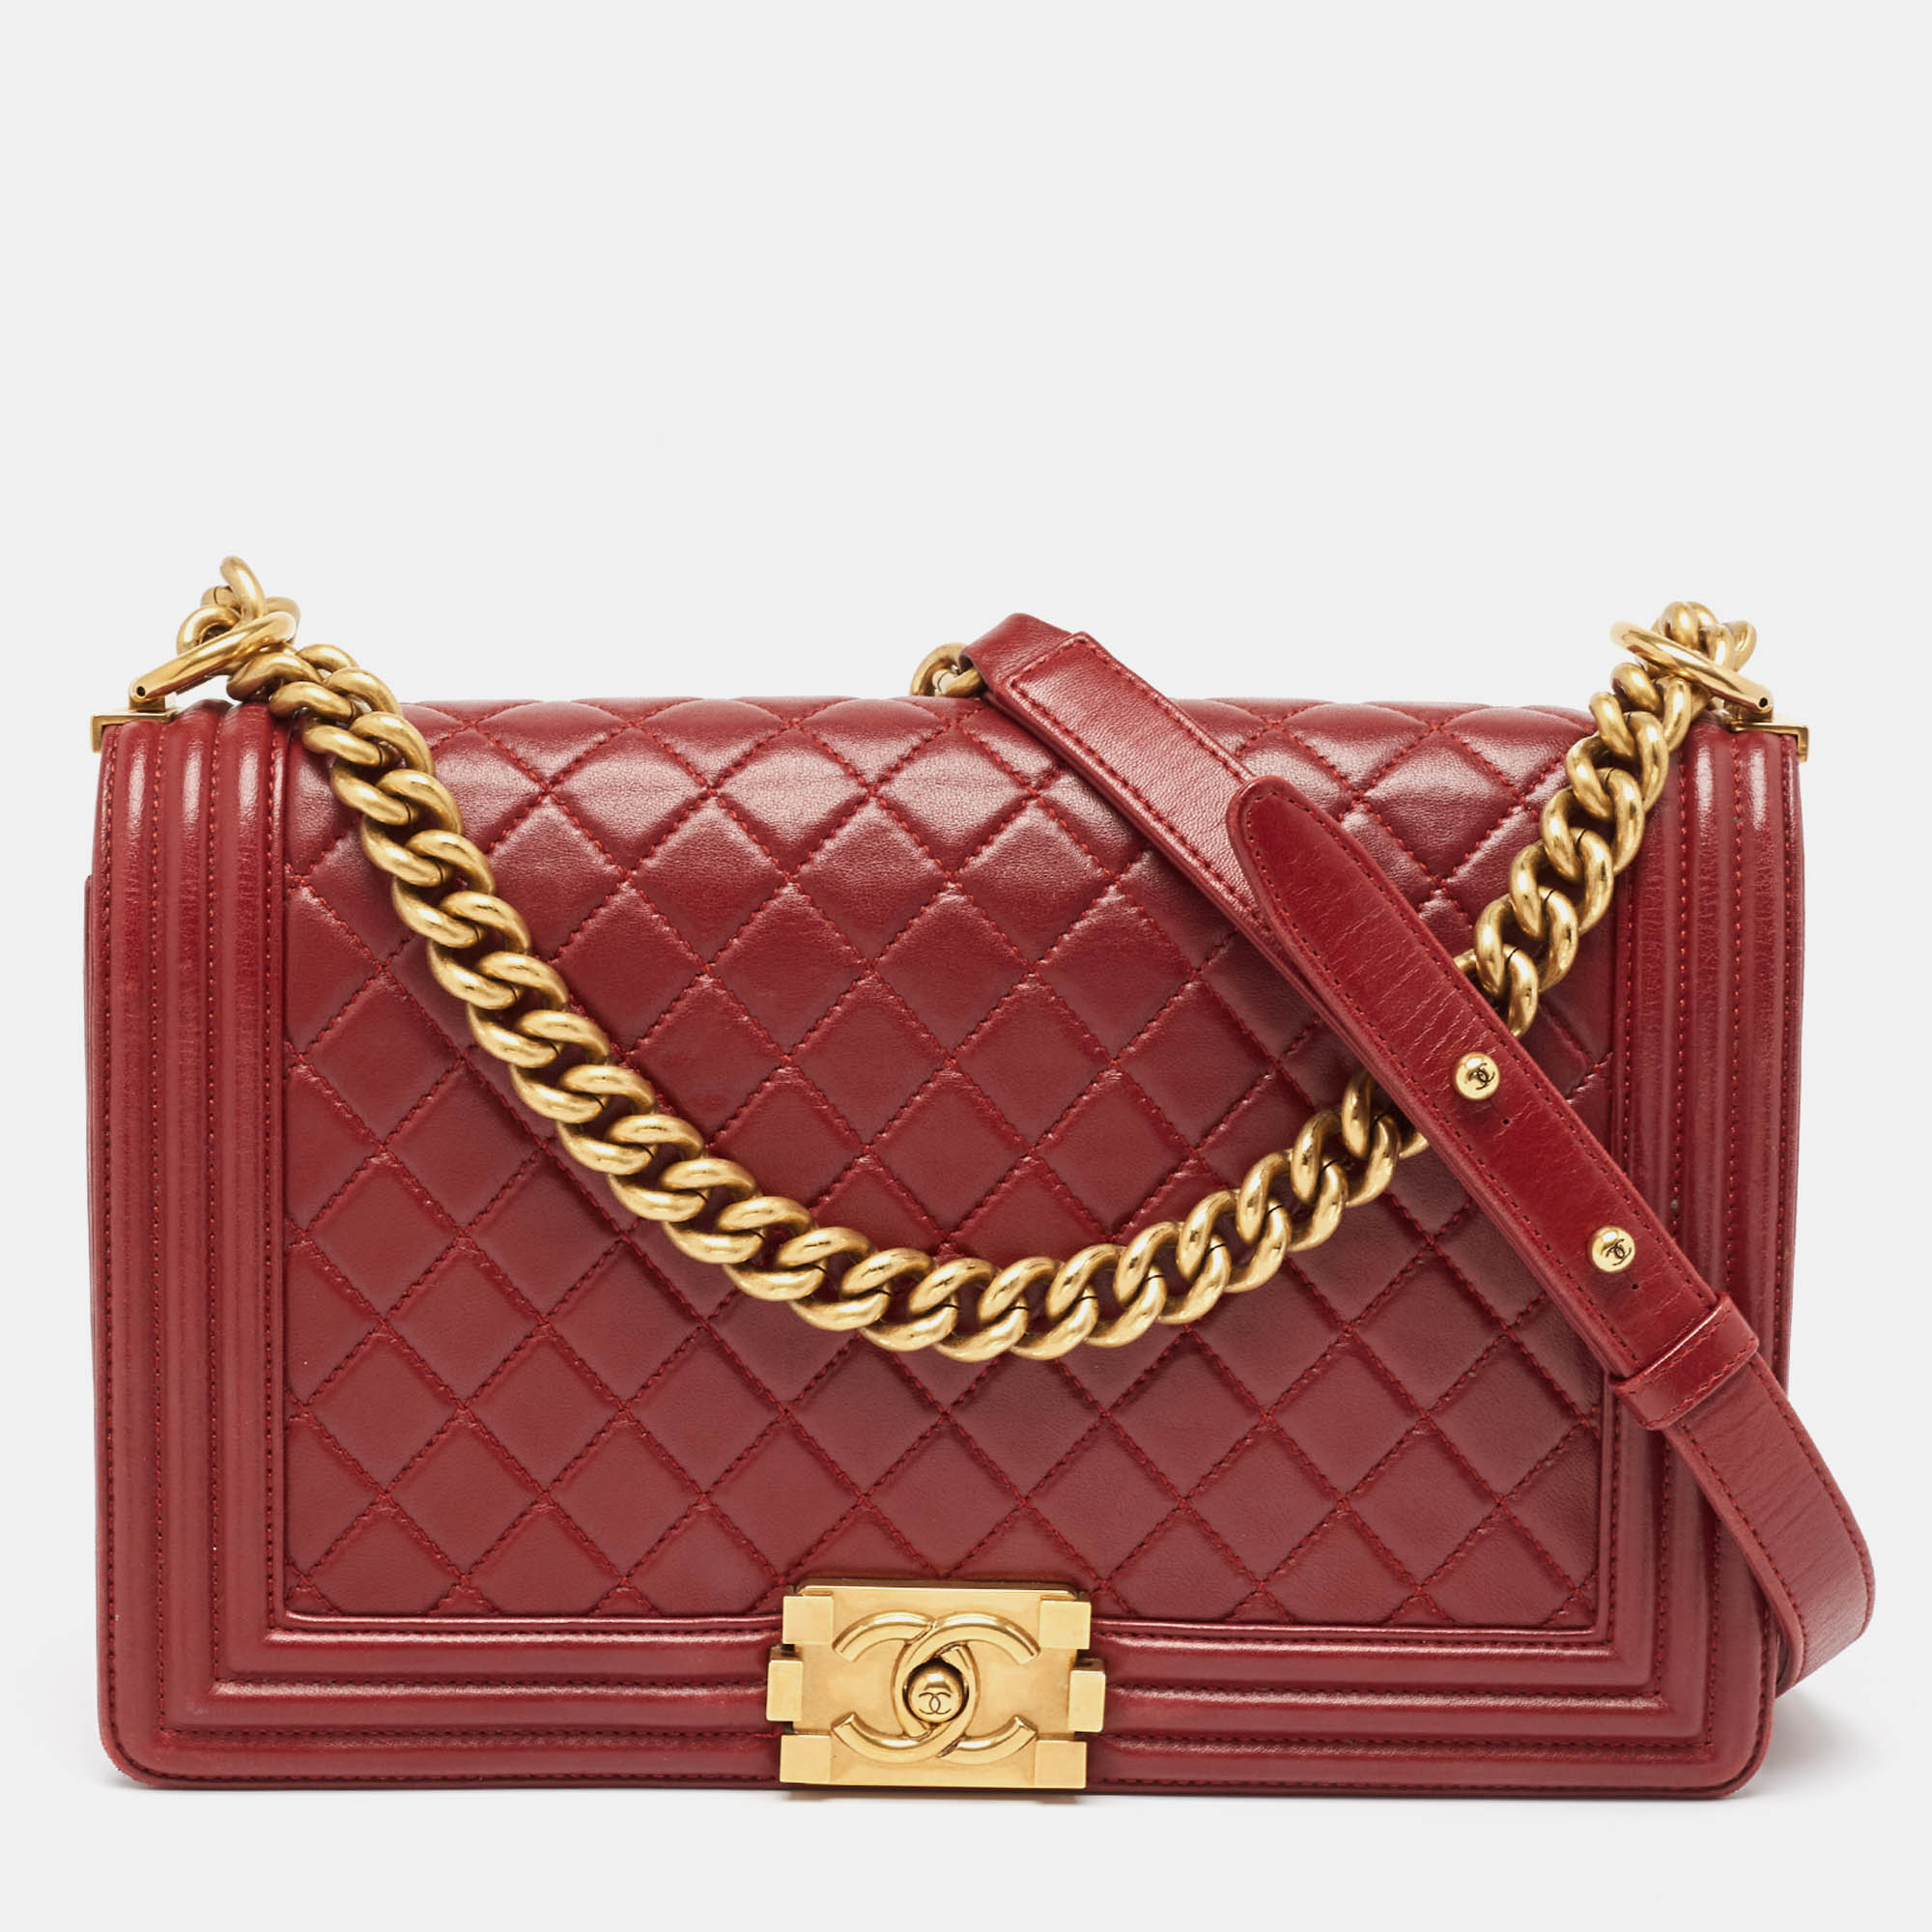 Chanel red quilted leather new medium boy bag